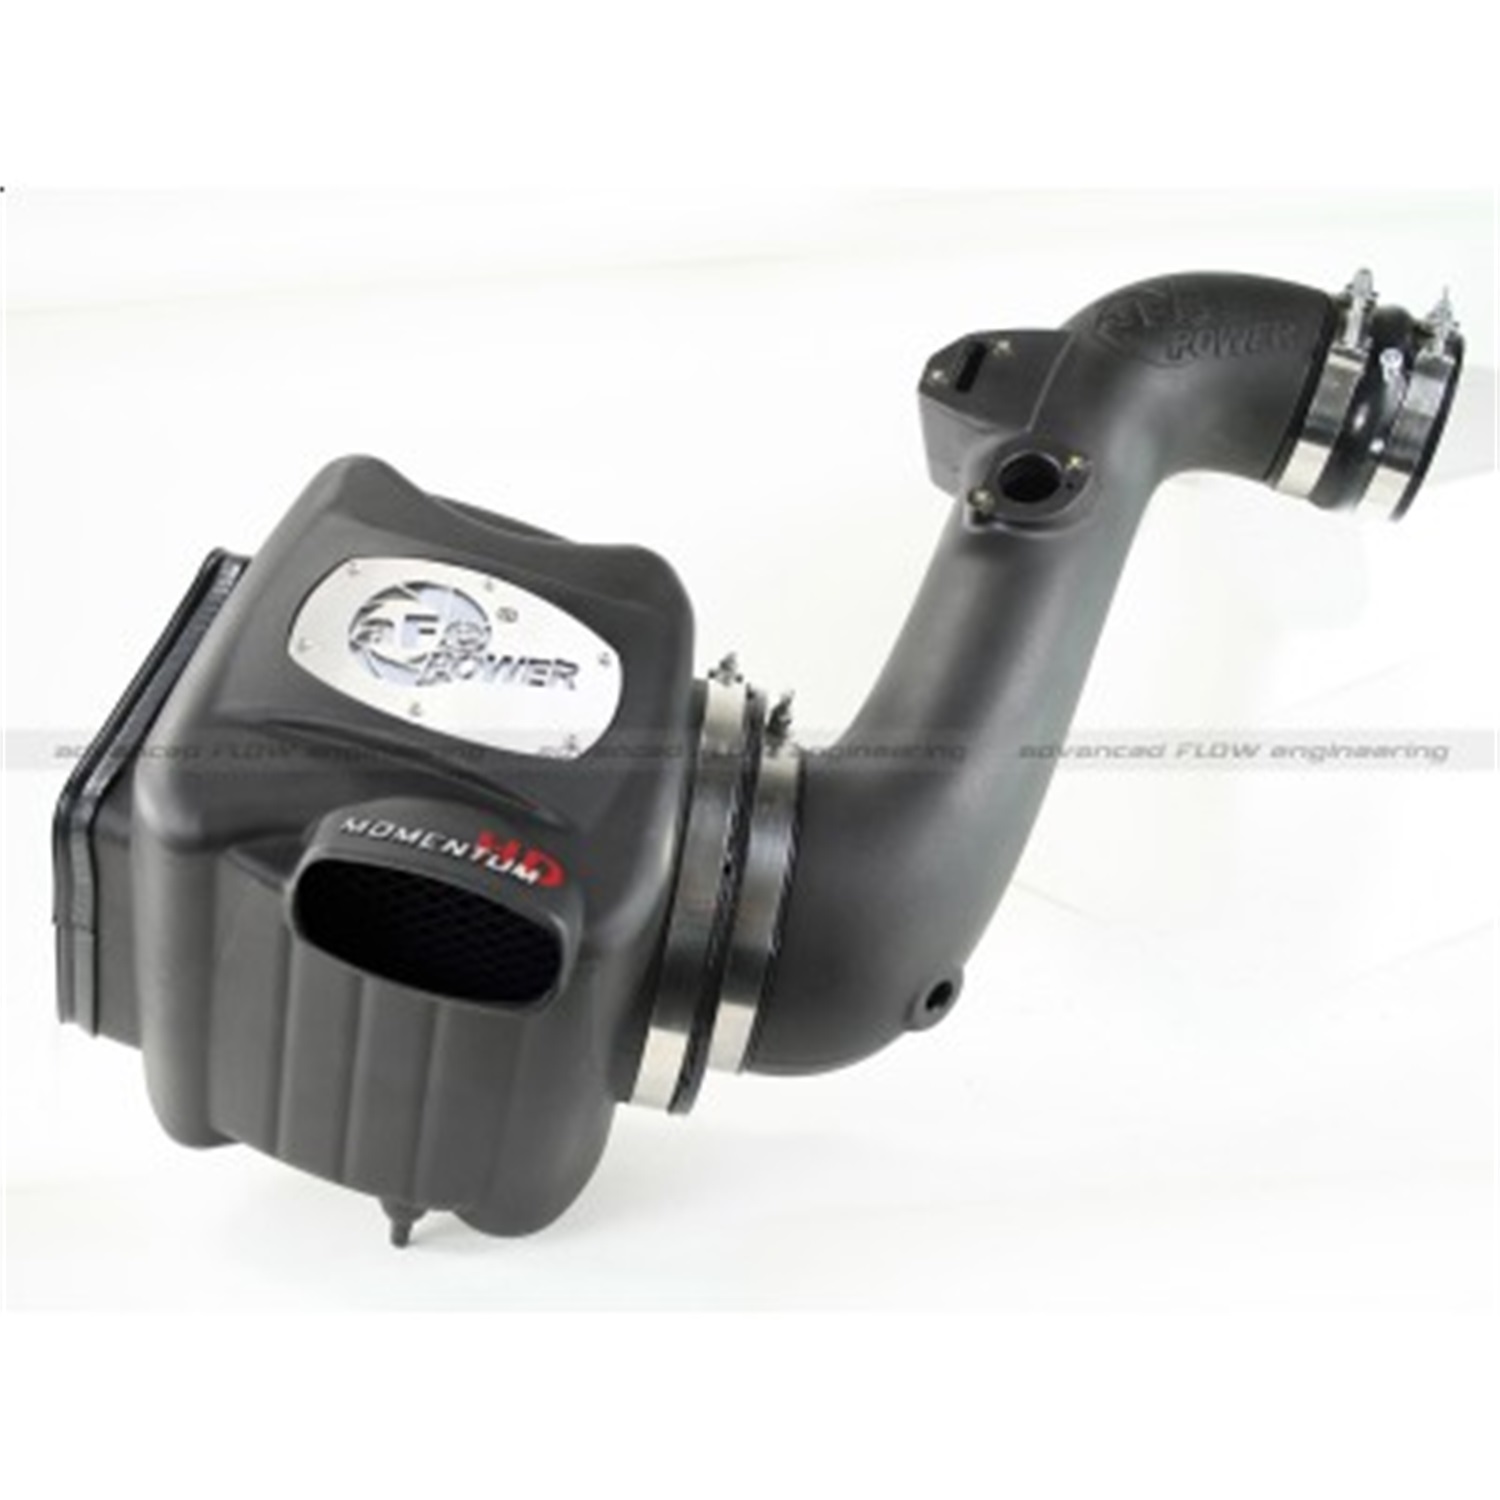 aFe Power aFe Power 75-74006 Momentum HD PRO GUARD 7 Stage-2 Si Intake System